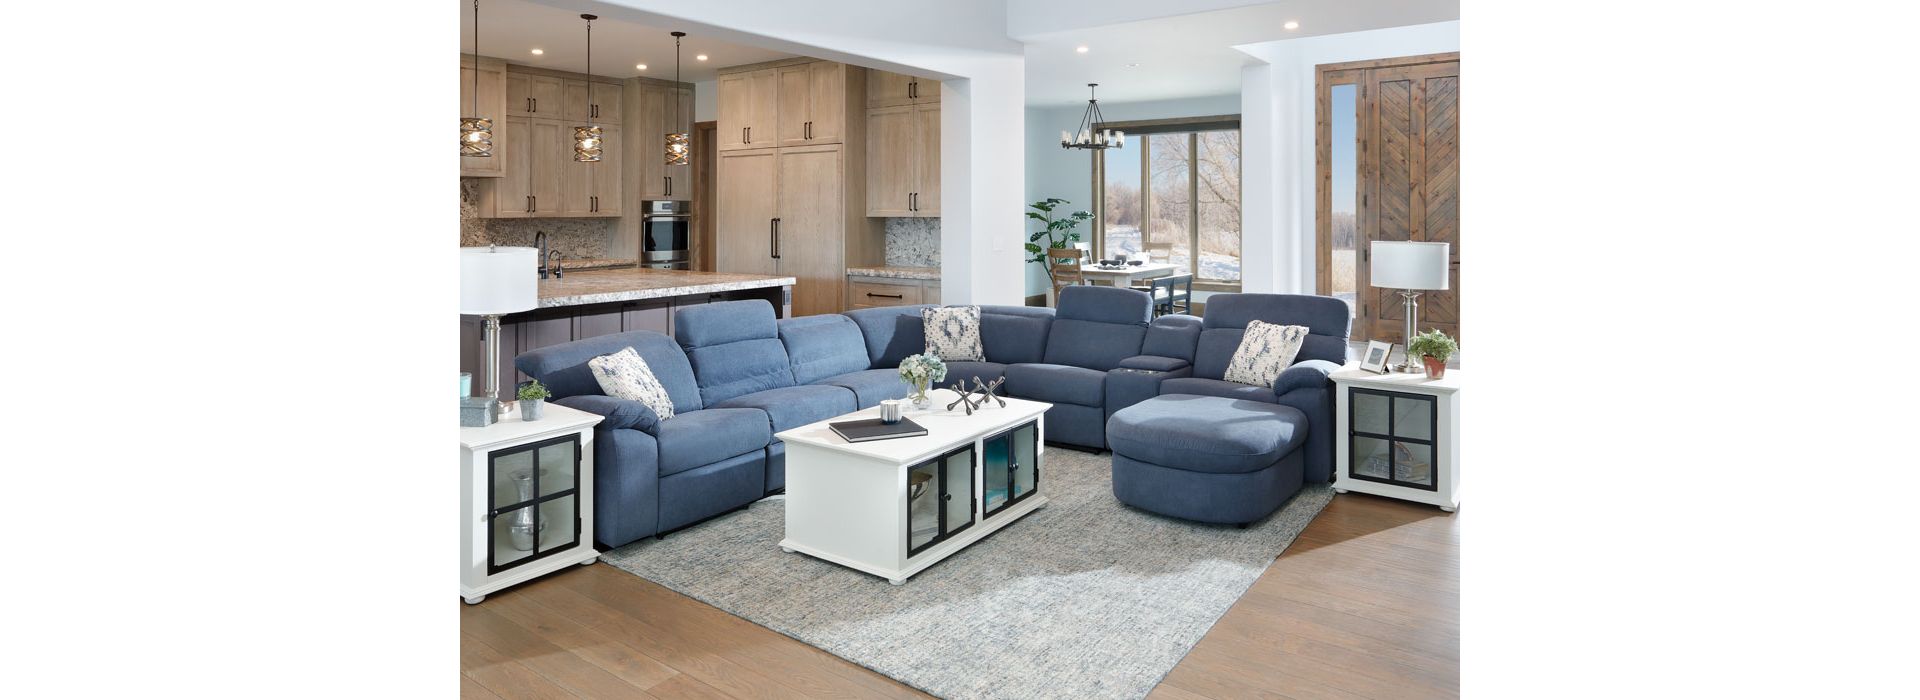 Blue Sectional with adjustable head rests, storage, and a pullout sleeper